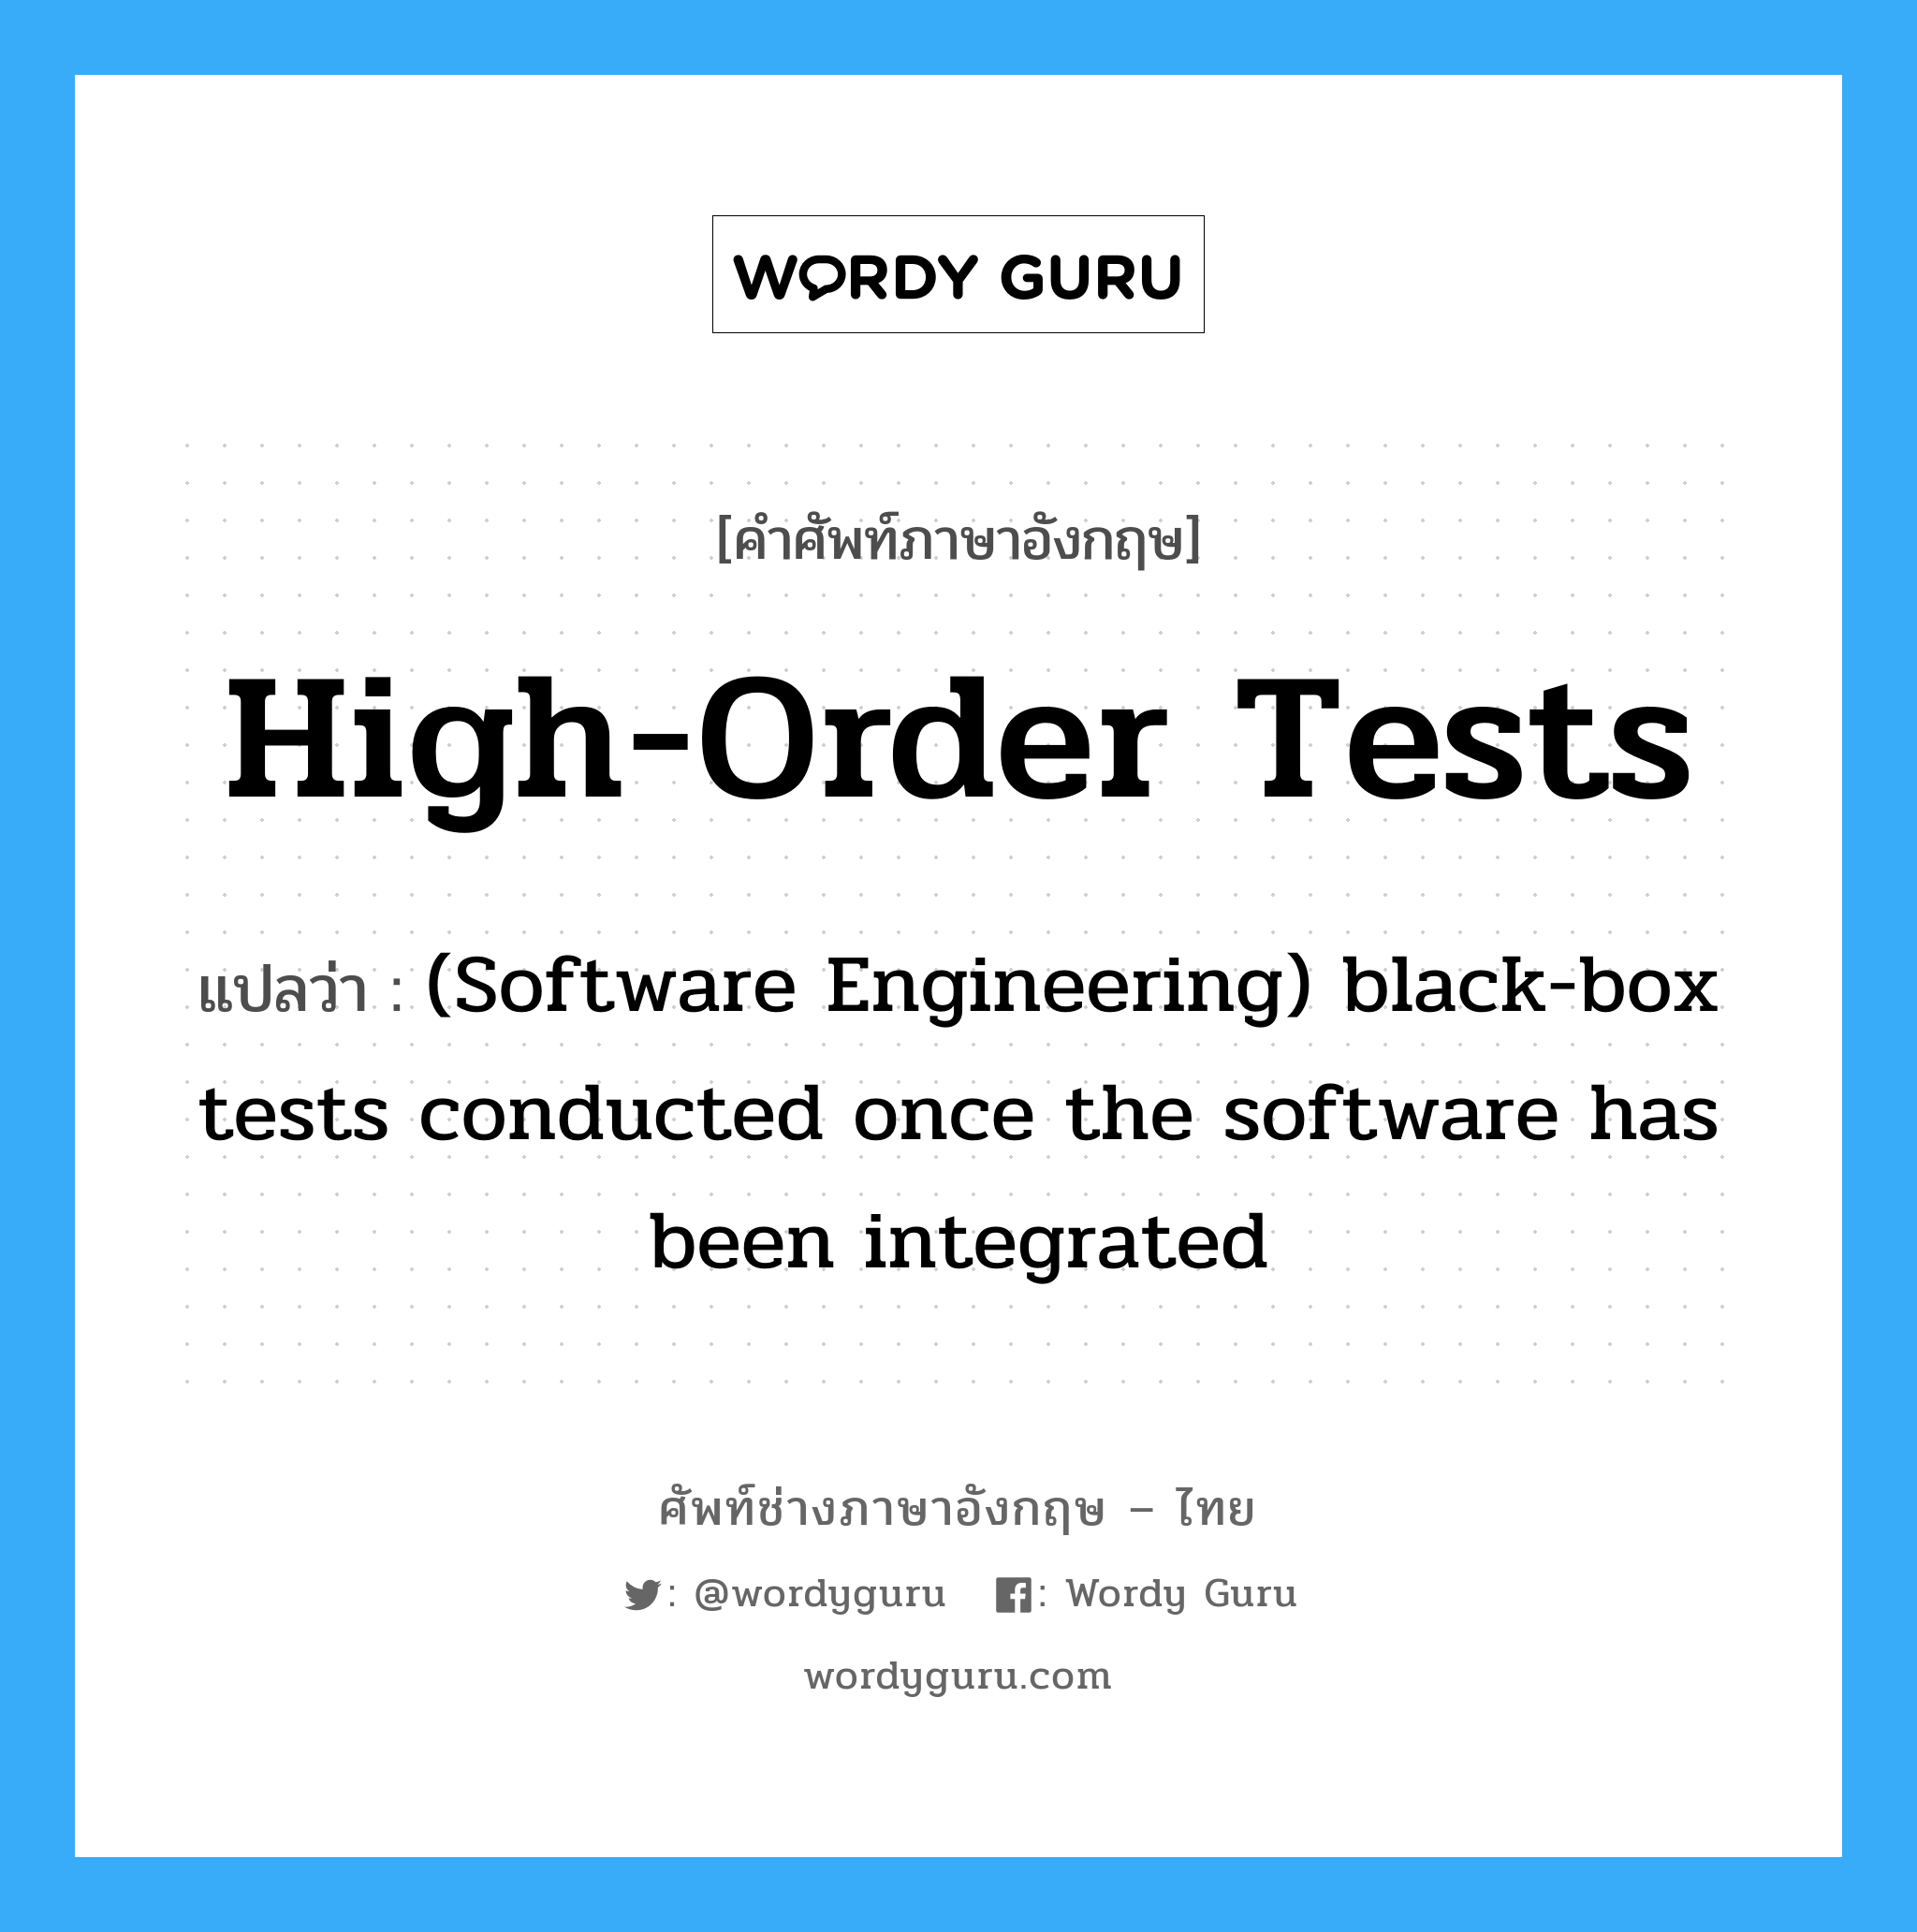 (Software Engineering) black-box tests conducted once the software has been integrated ภาษาอังกฤษ?, คำศัพท์ช่างภาษาอังกฤษ - ไทย (Software Engineering) black-box tests conducted once the software has been integrated คำศัพท์ภาษาอังกฤษ (Software Engineering) black-box tests conducted once the software has been integrated แปลว่า High-order tests